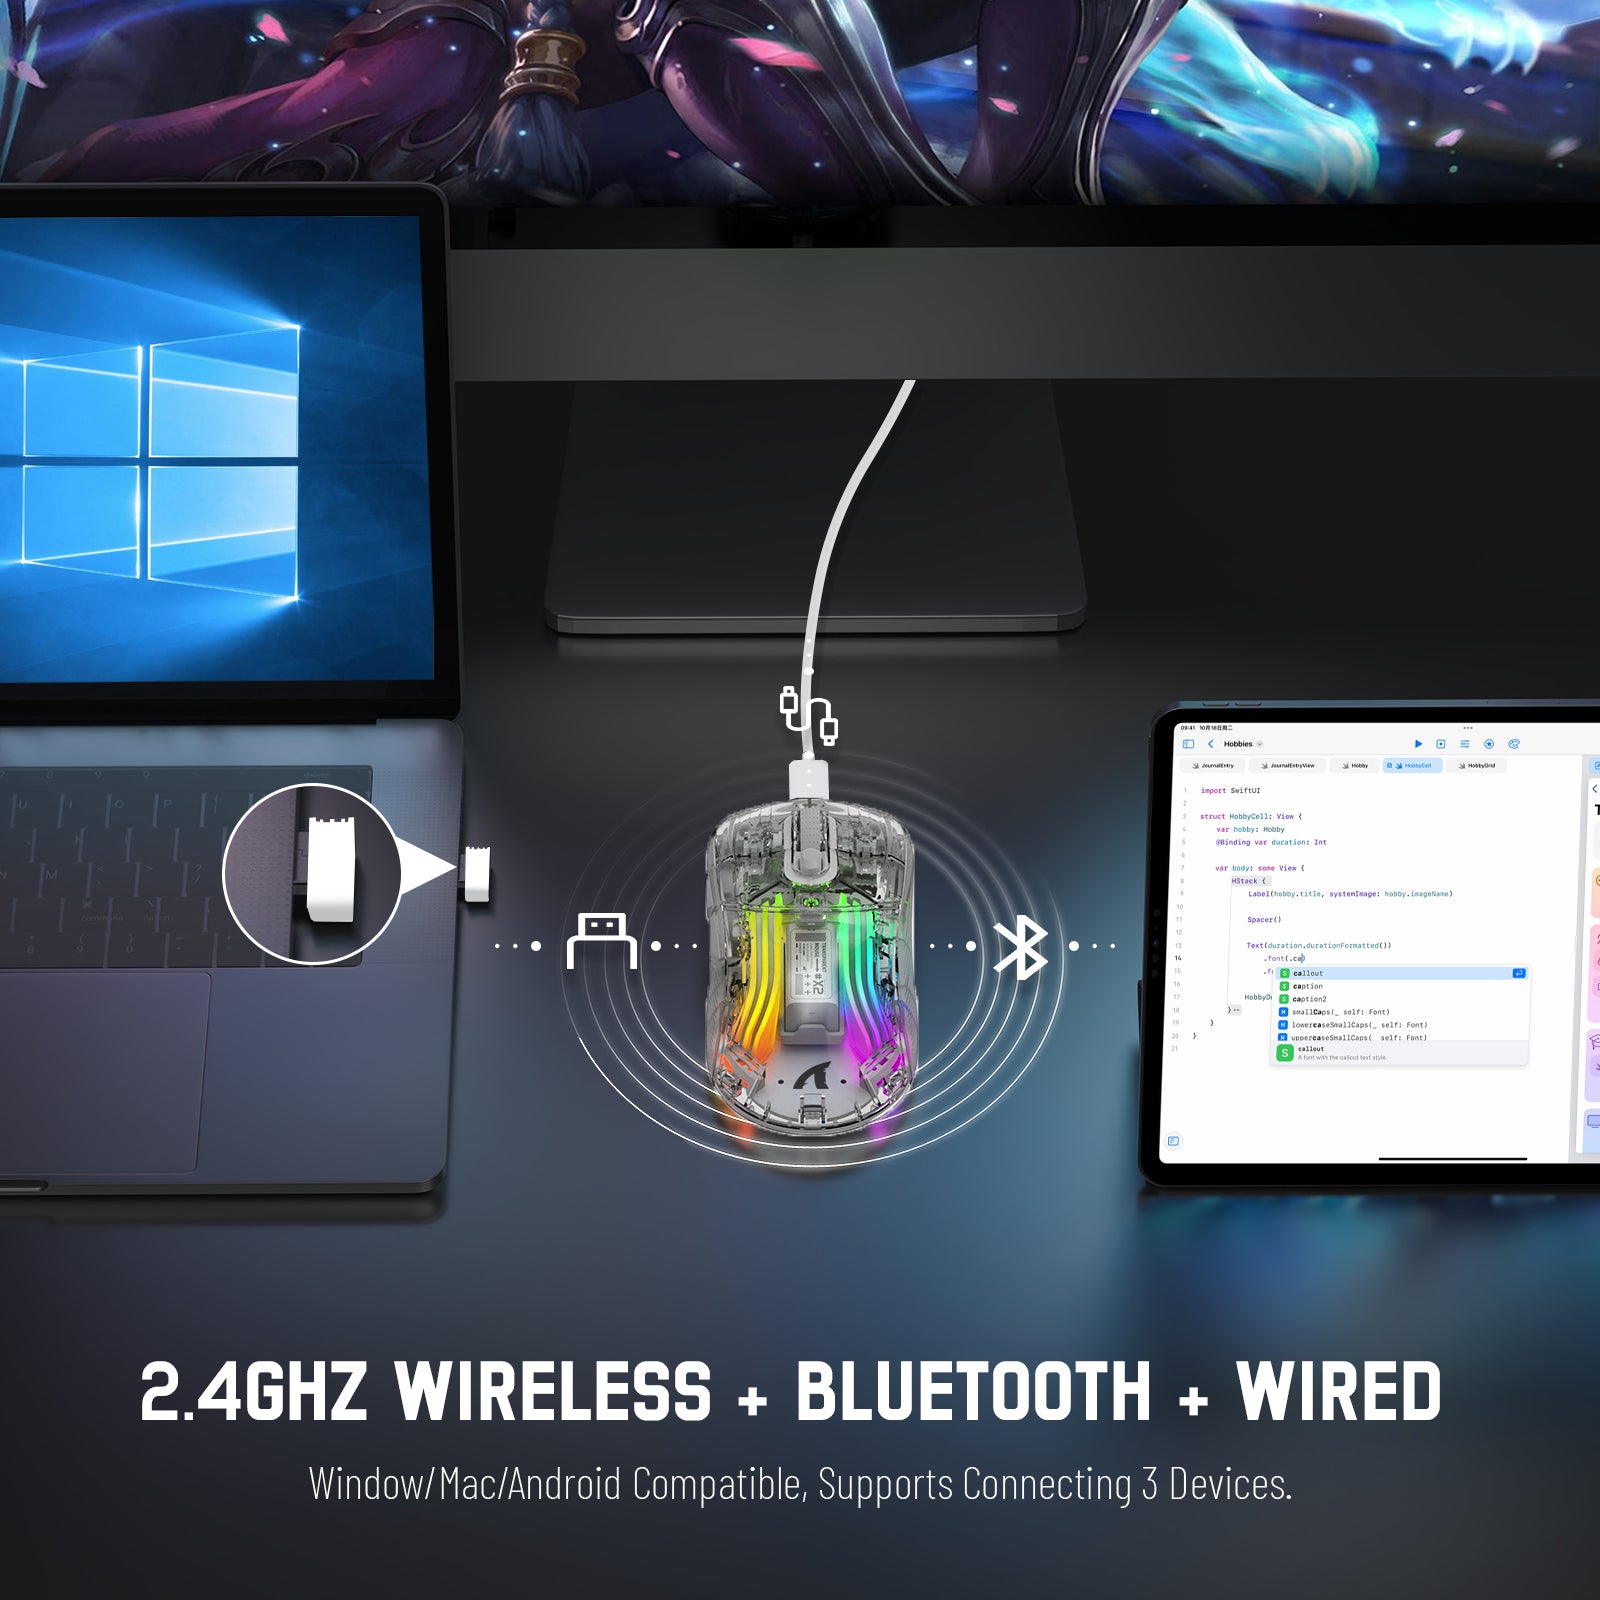 ATTACK SHARK X2 Wireless Transparent Gaming Mouse, Tri-Mode(2.4Ghz, Bluetooth 5.0, USB C Wired), PixArt 3212-RGB Backlit-2400DPI